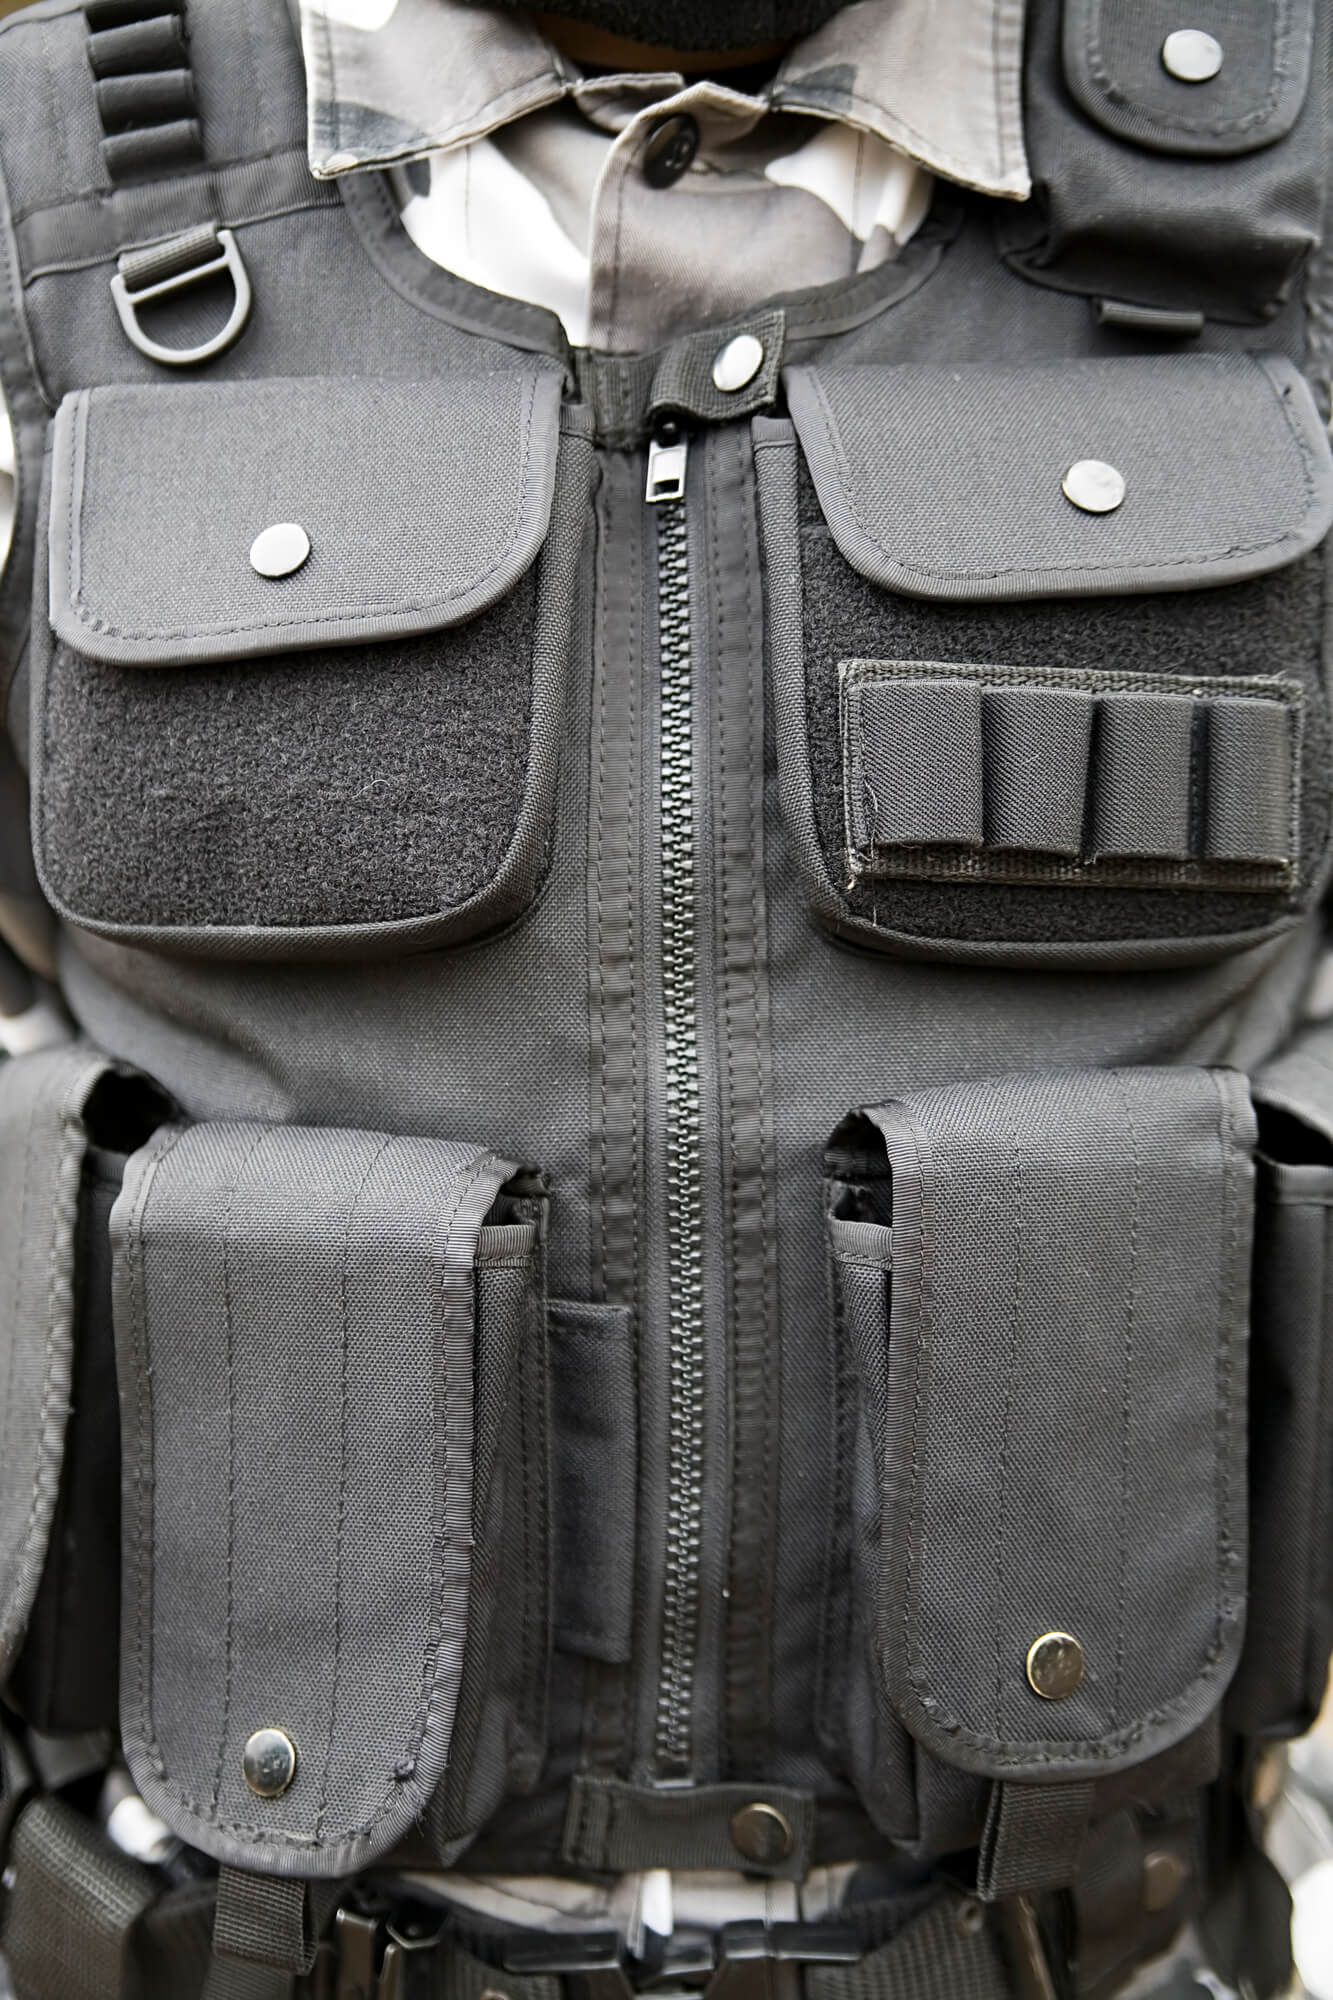 Best Tactical Vests: Protect Your Body and Have Your Gear Organized